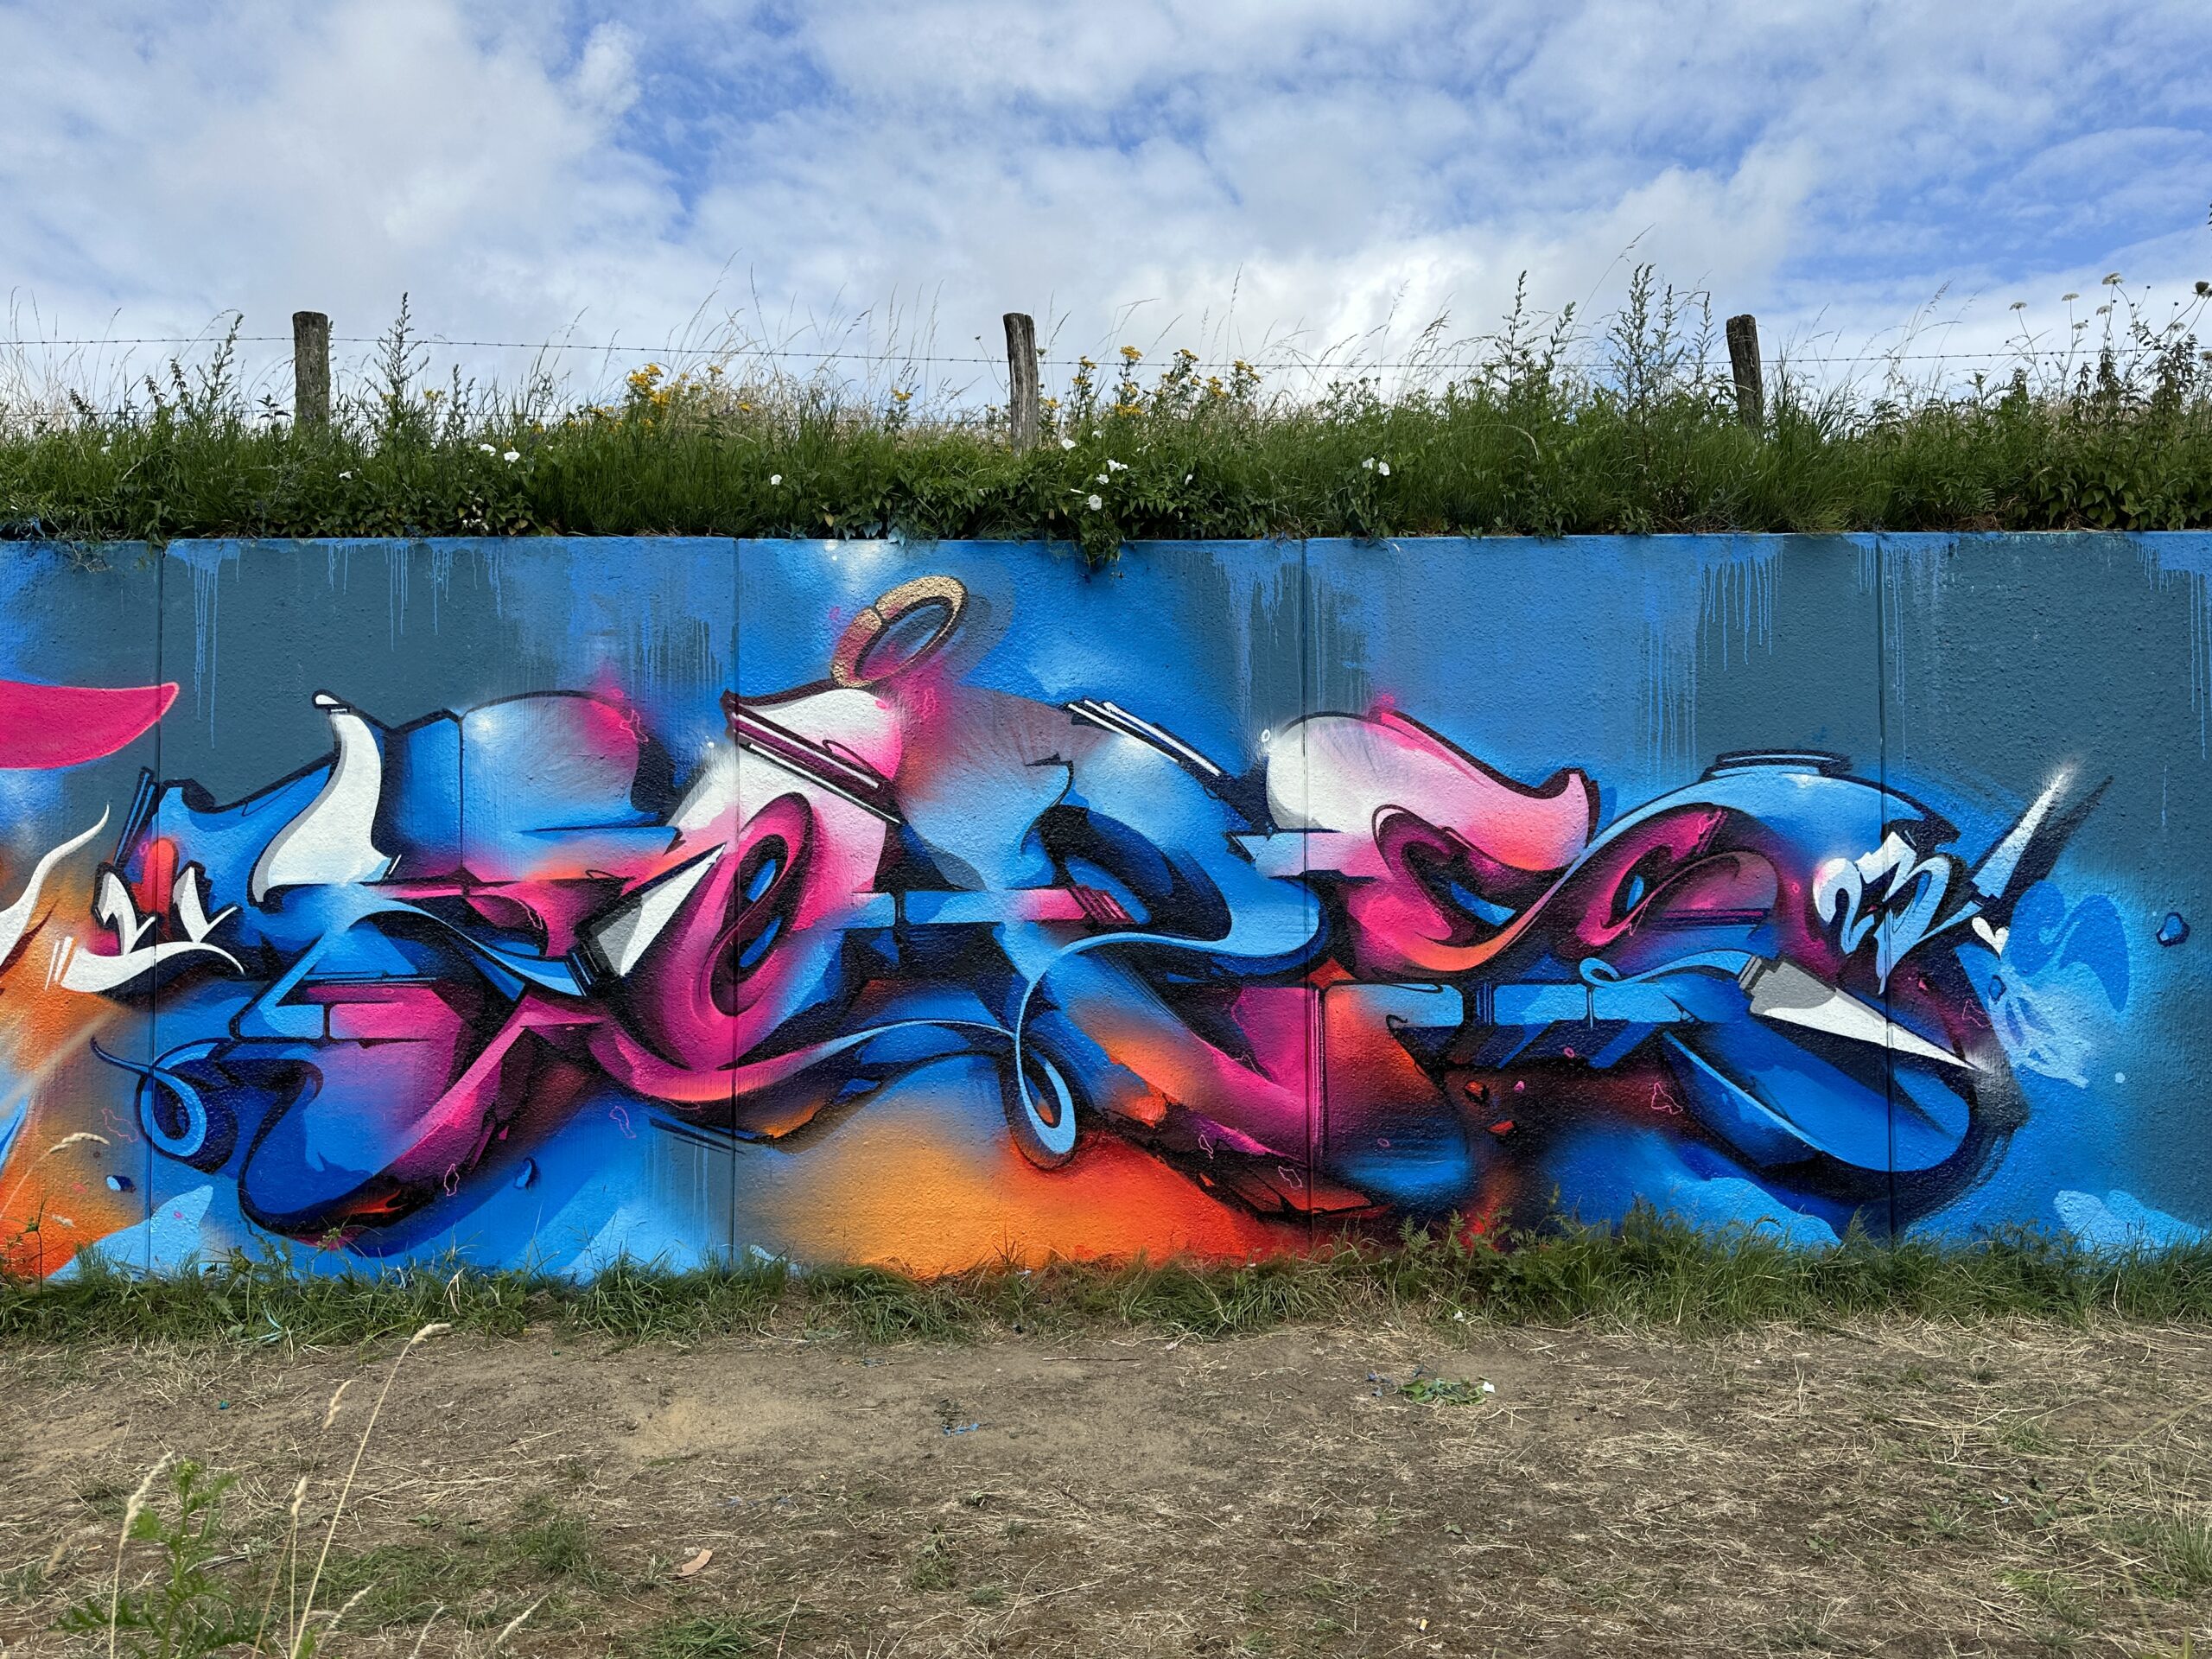 A work by Does - Geleen, the Netherlands July 2023